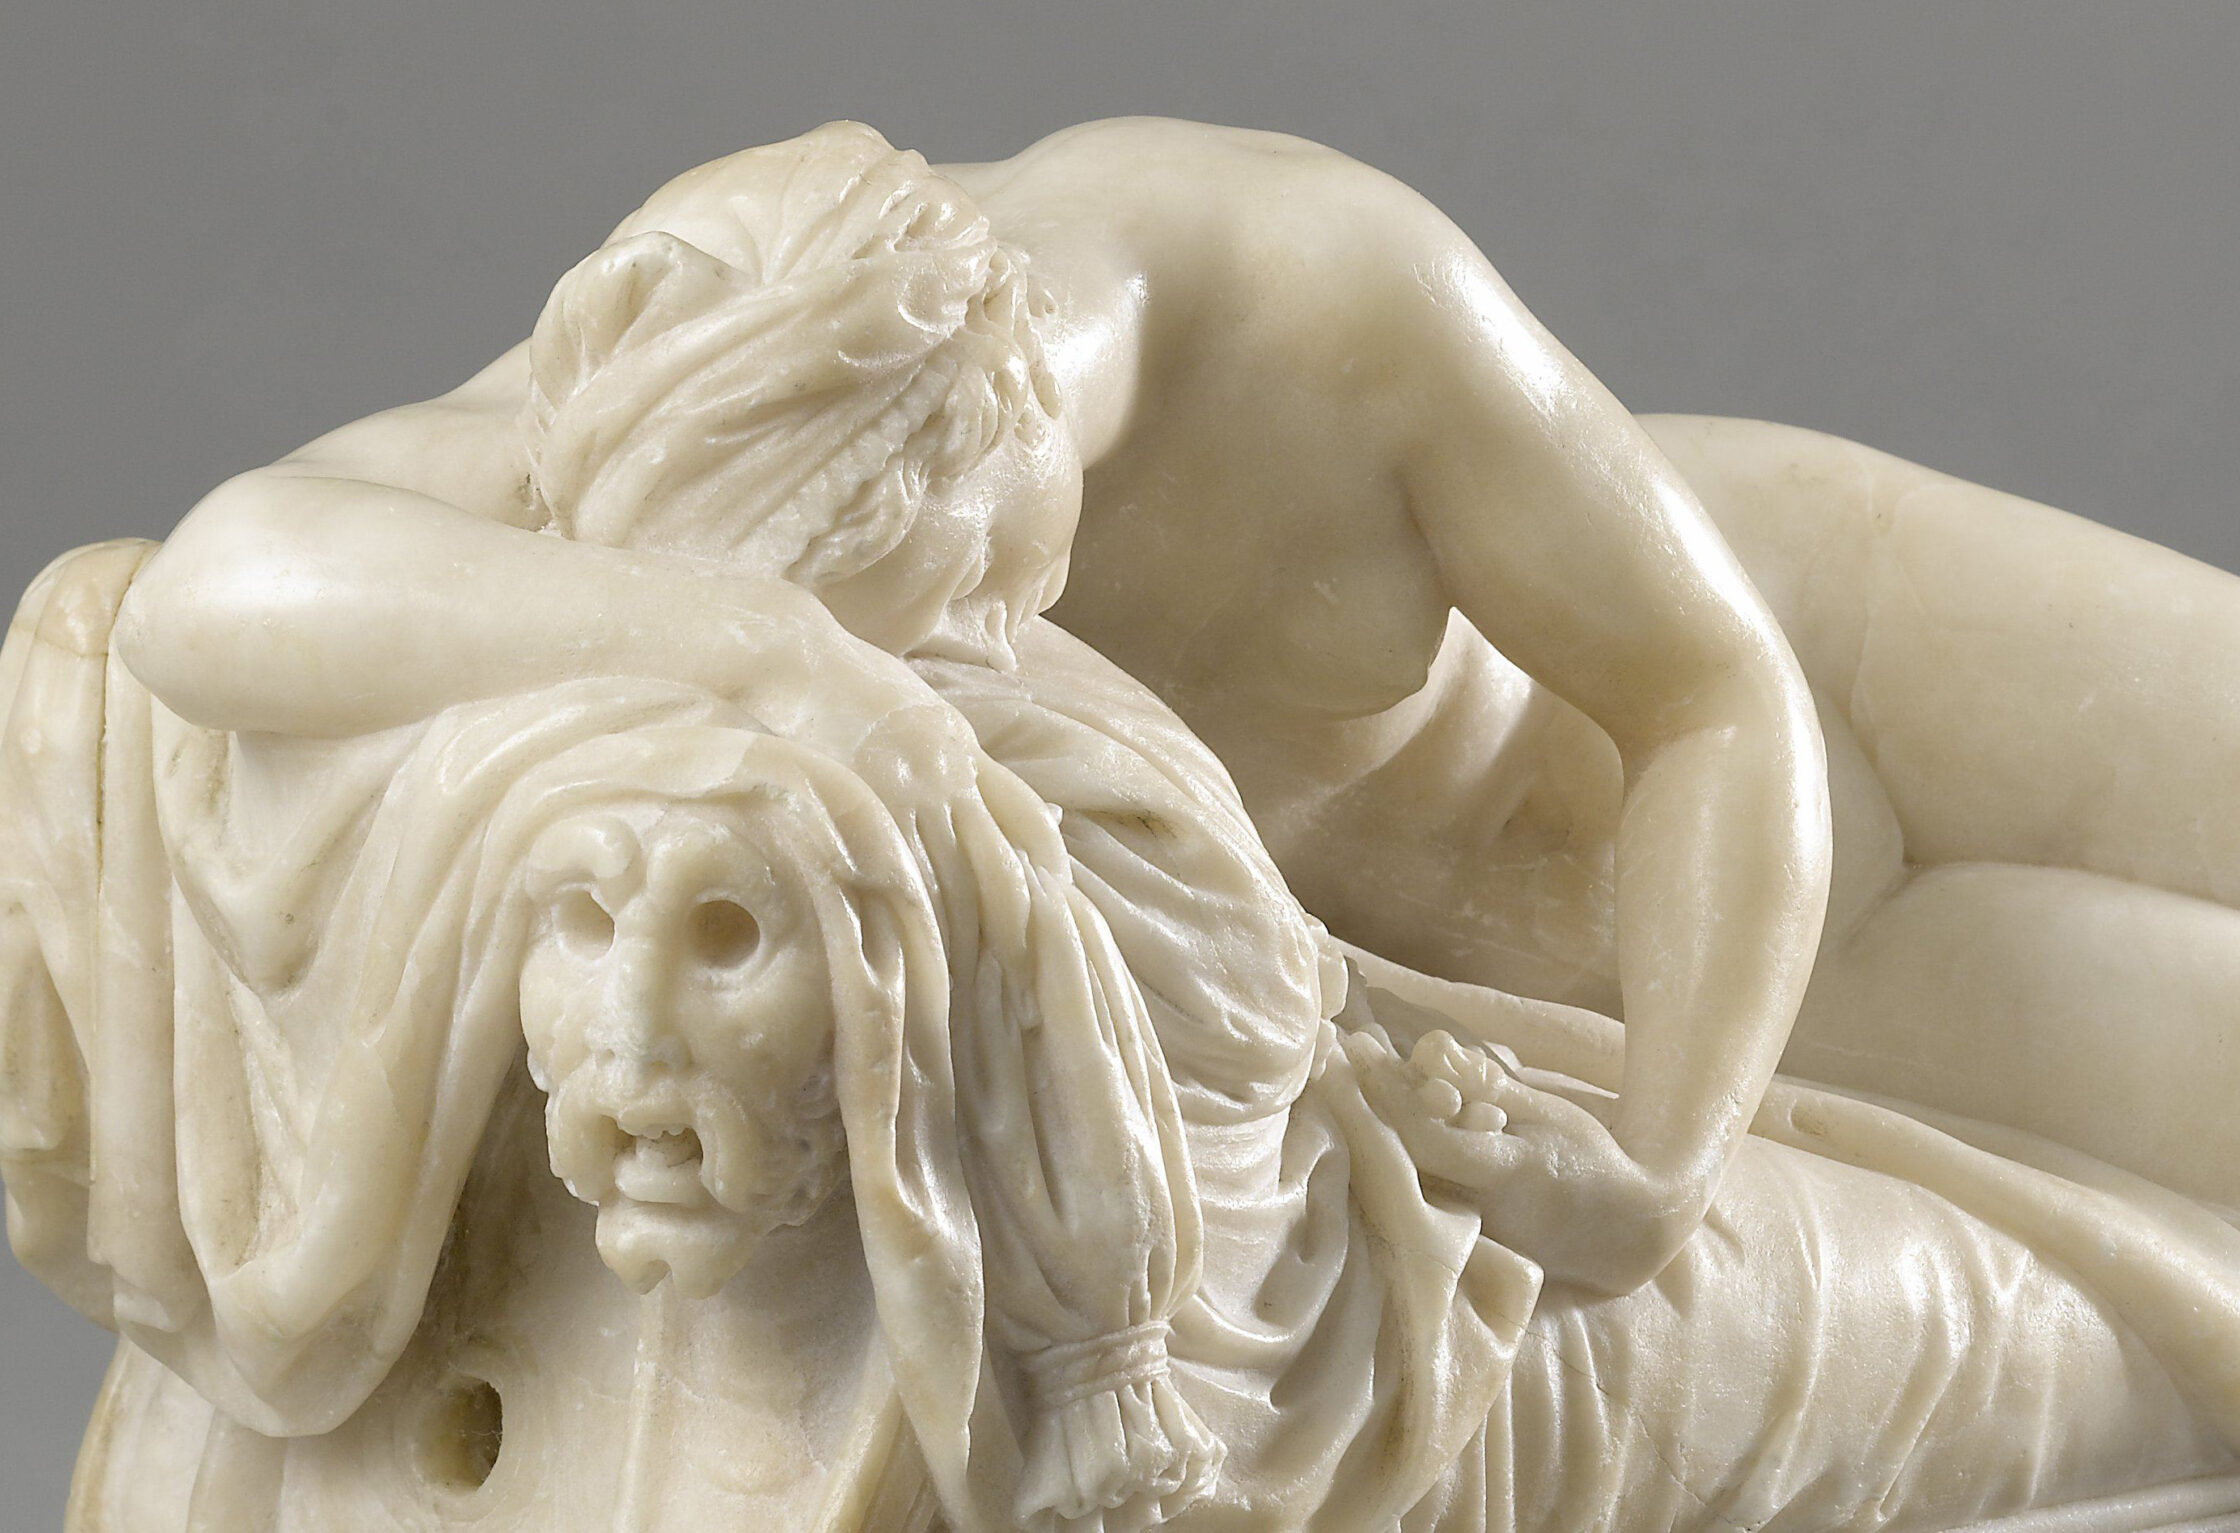 photograph of an alabaster sculpture depicting a woman (nymph) lying on a chaiselongue with her head resting on her arm; created around 1560 by Flemish sculptor van den Broecke, reminiscent of Michelangelo; Rijksmuseum Amsterdam, object number BK-1979-7, title of artwork: Sleeping Nymph